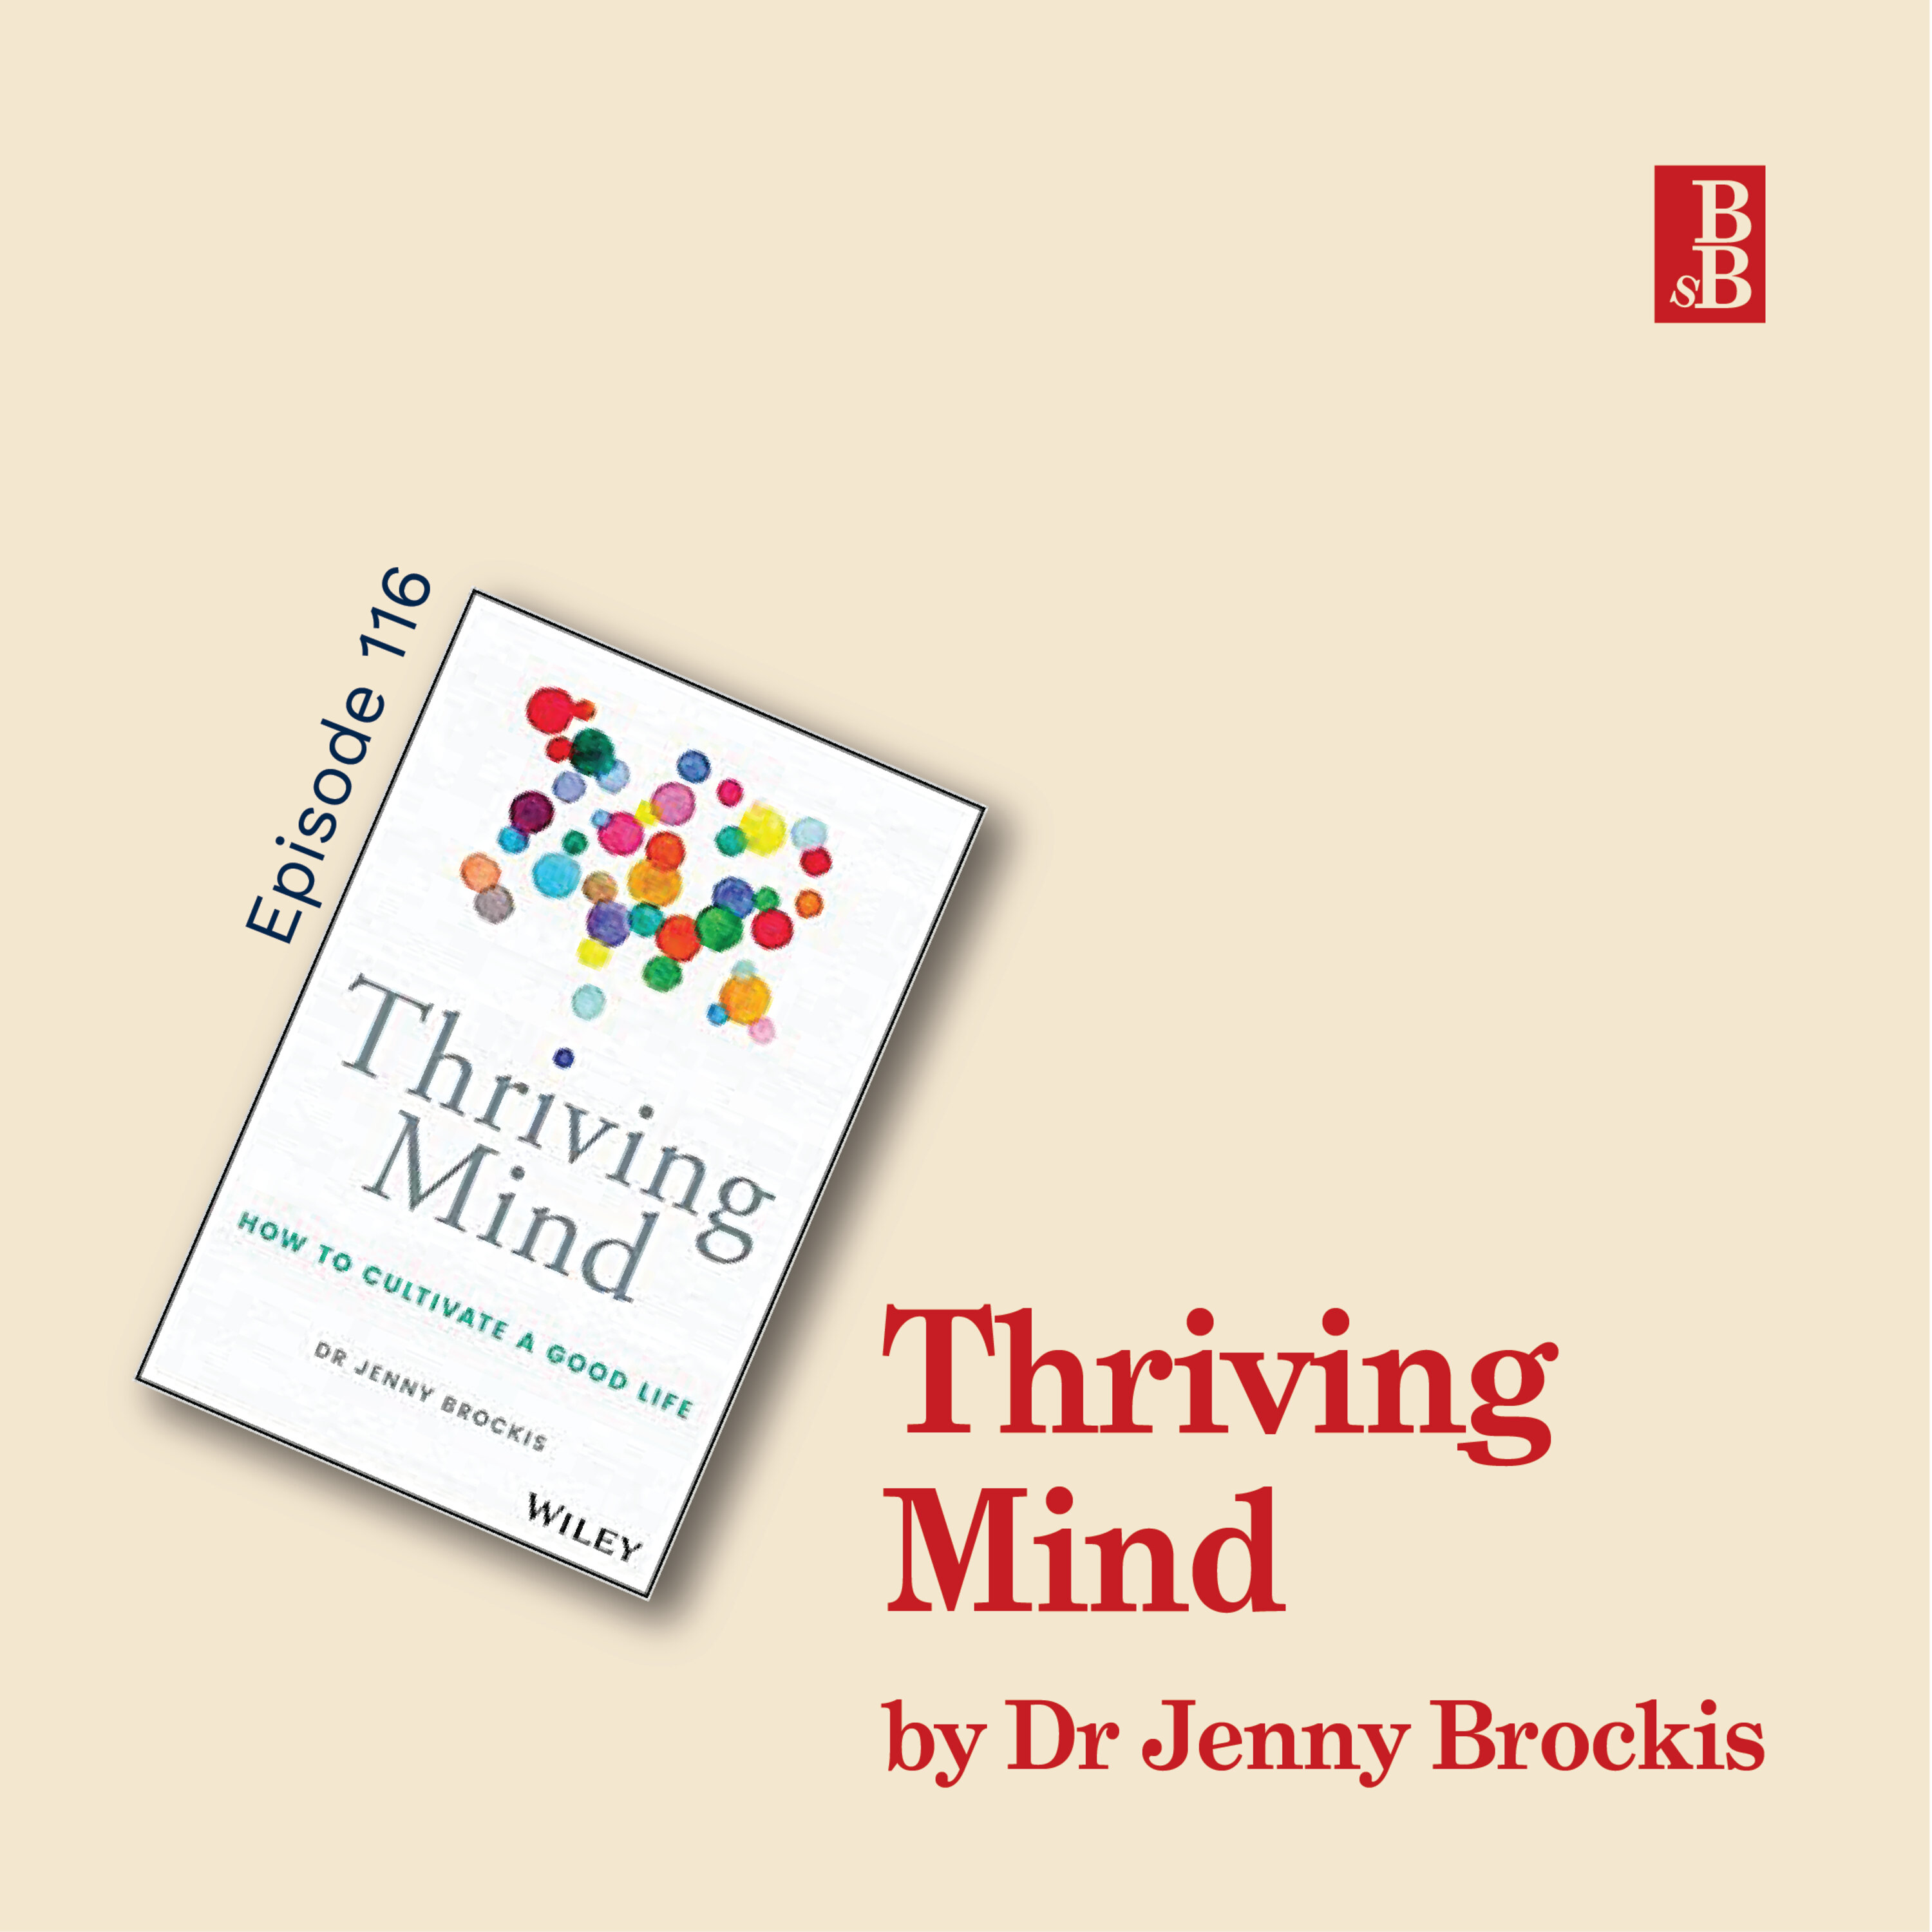 Thriving Mind by Dr Jenny Brockis: how to get smarter by looking after yourself better